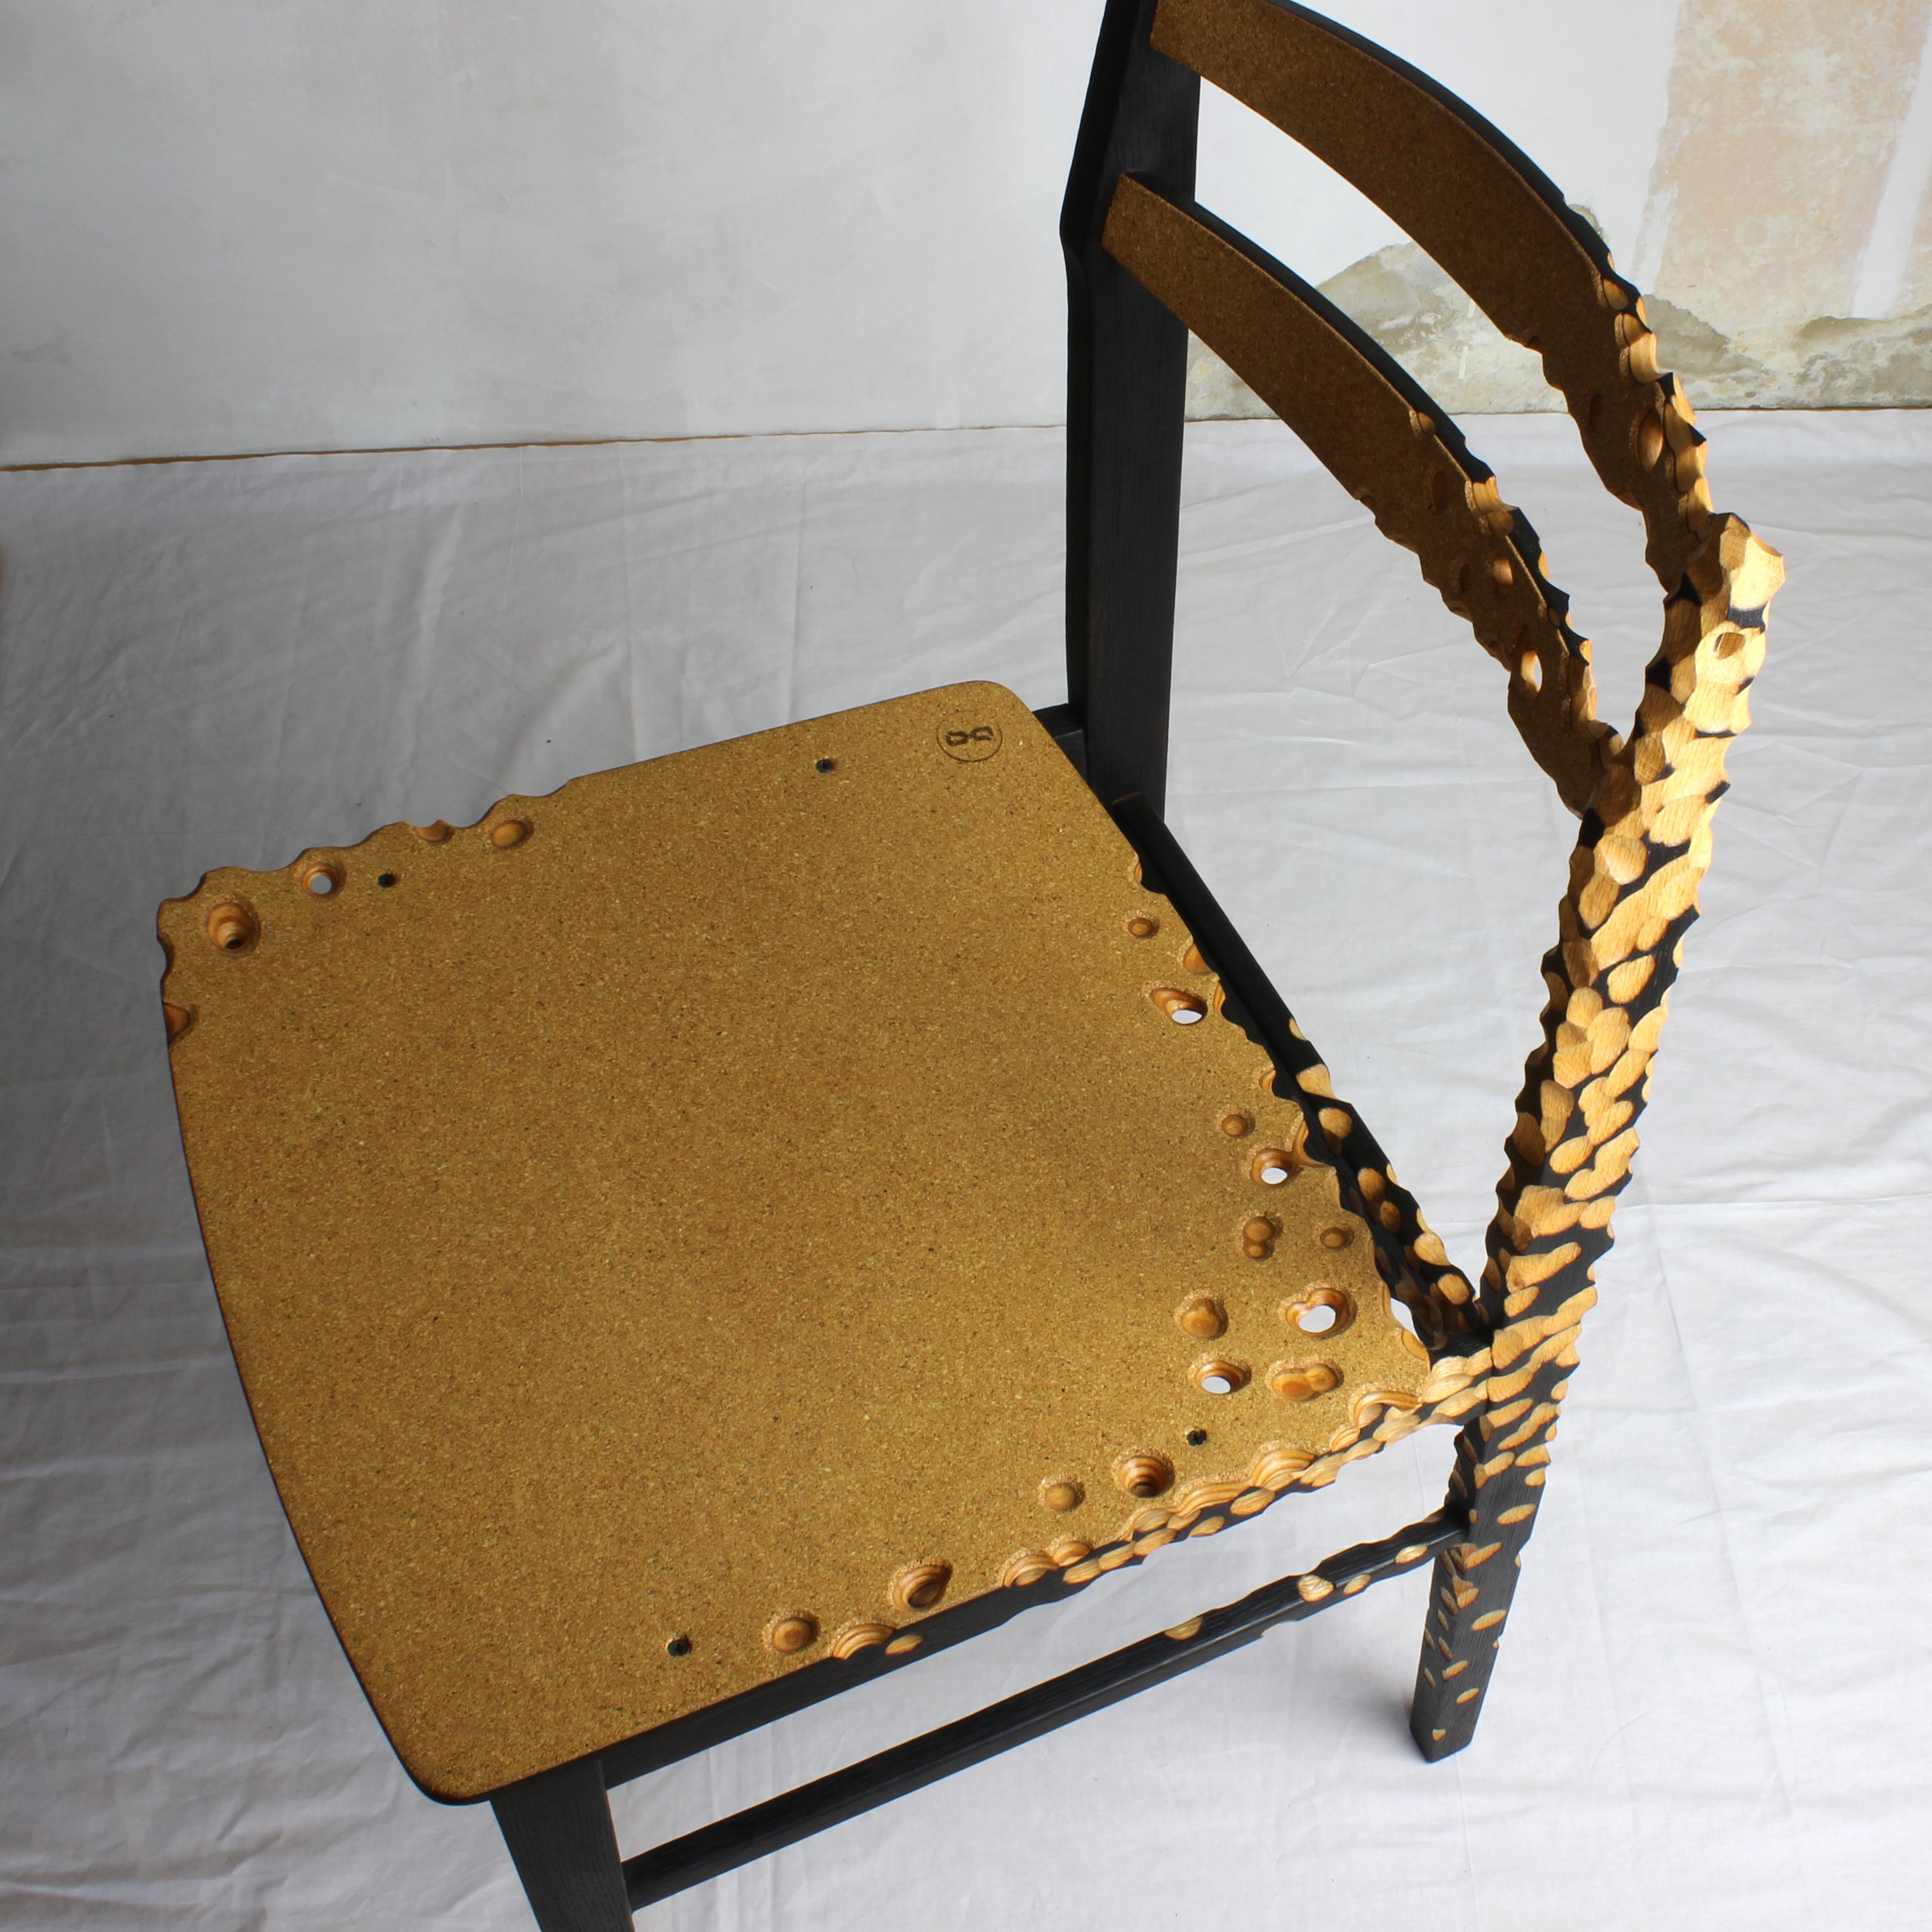 N1 Chair, Unique Sculptured, Charred Furniture, from Salvaged Chair and Cork For Sale 3